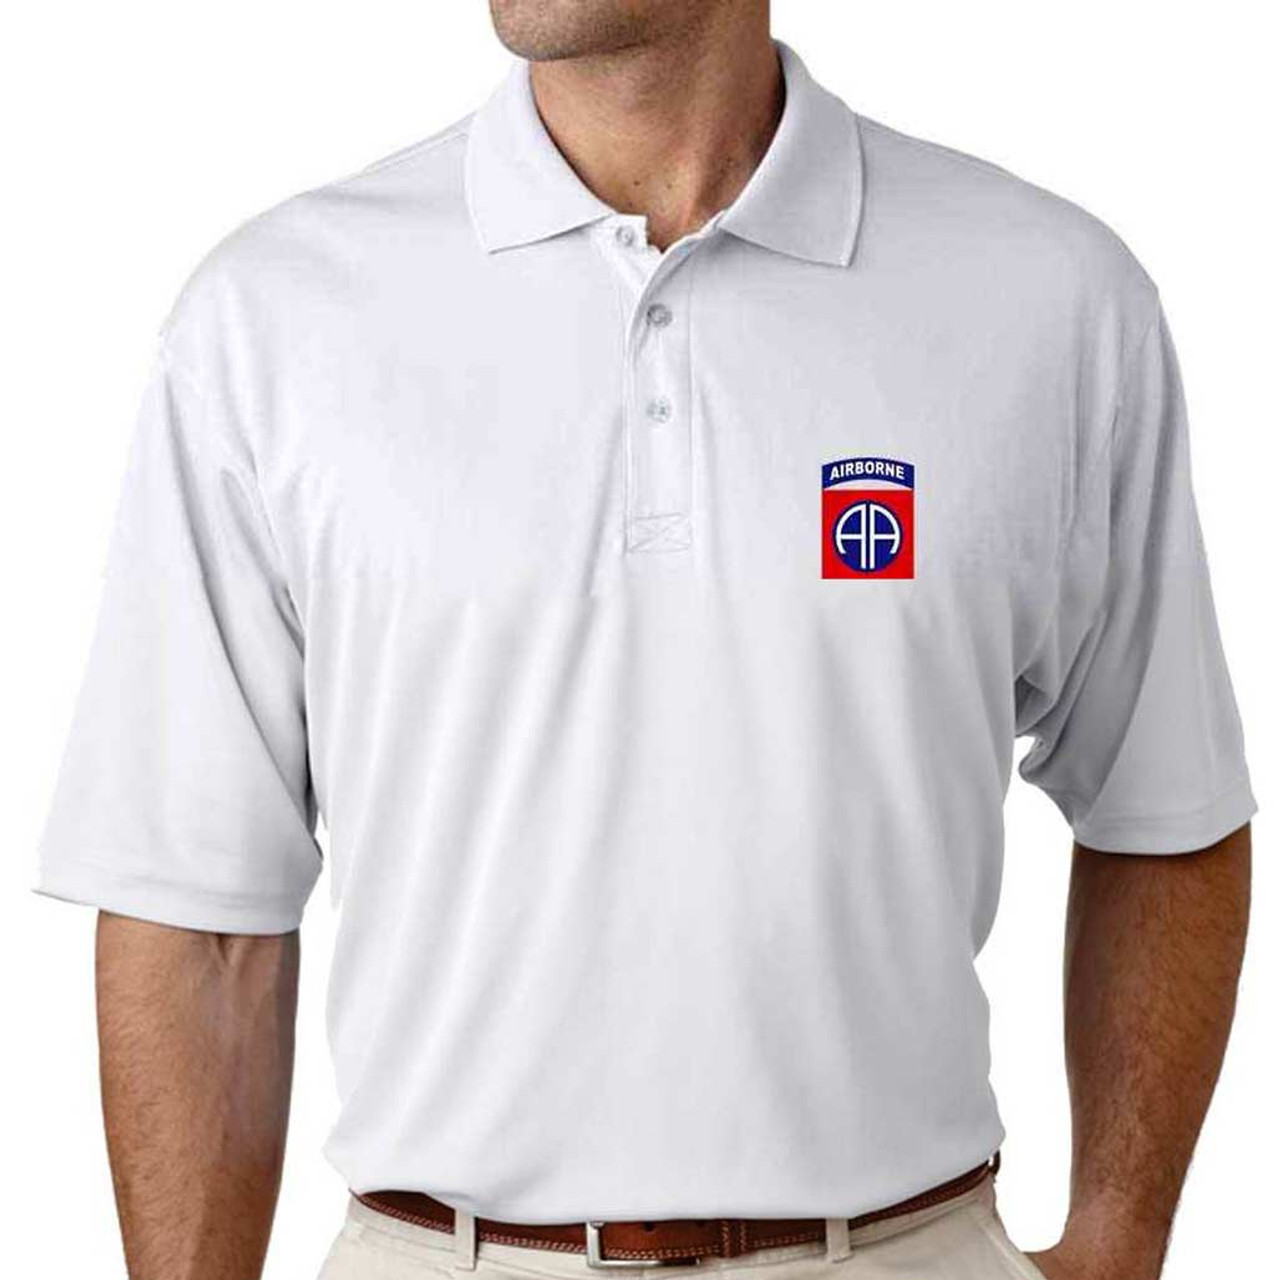 82nd airborne performance polo shirt